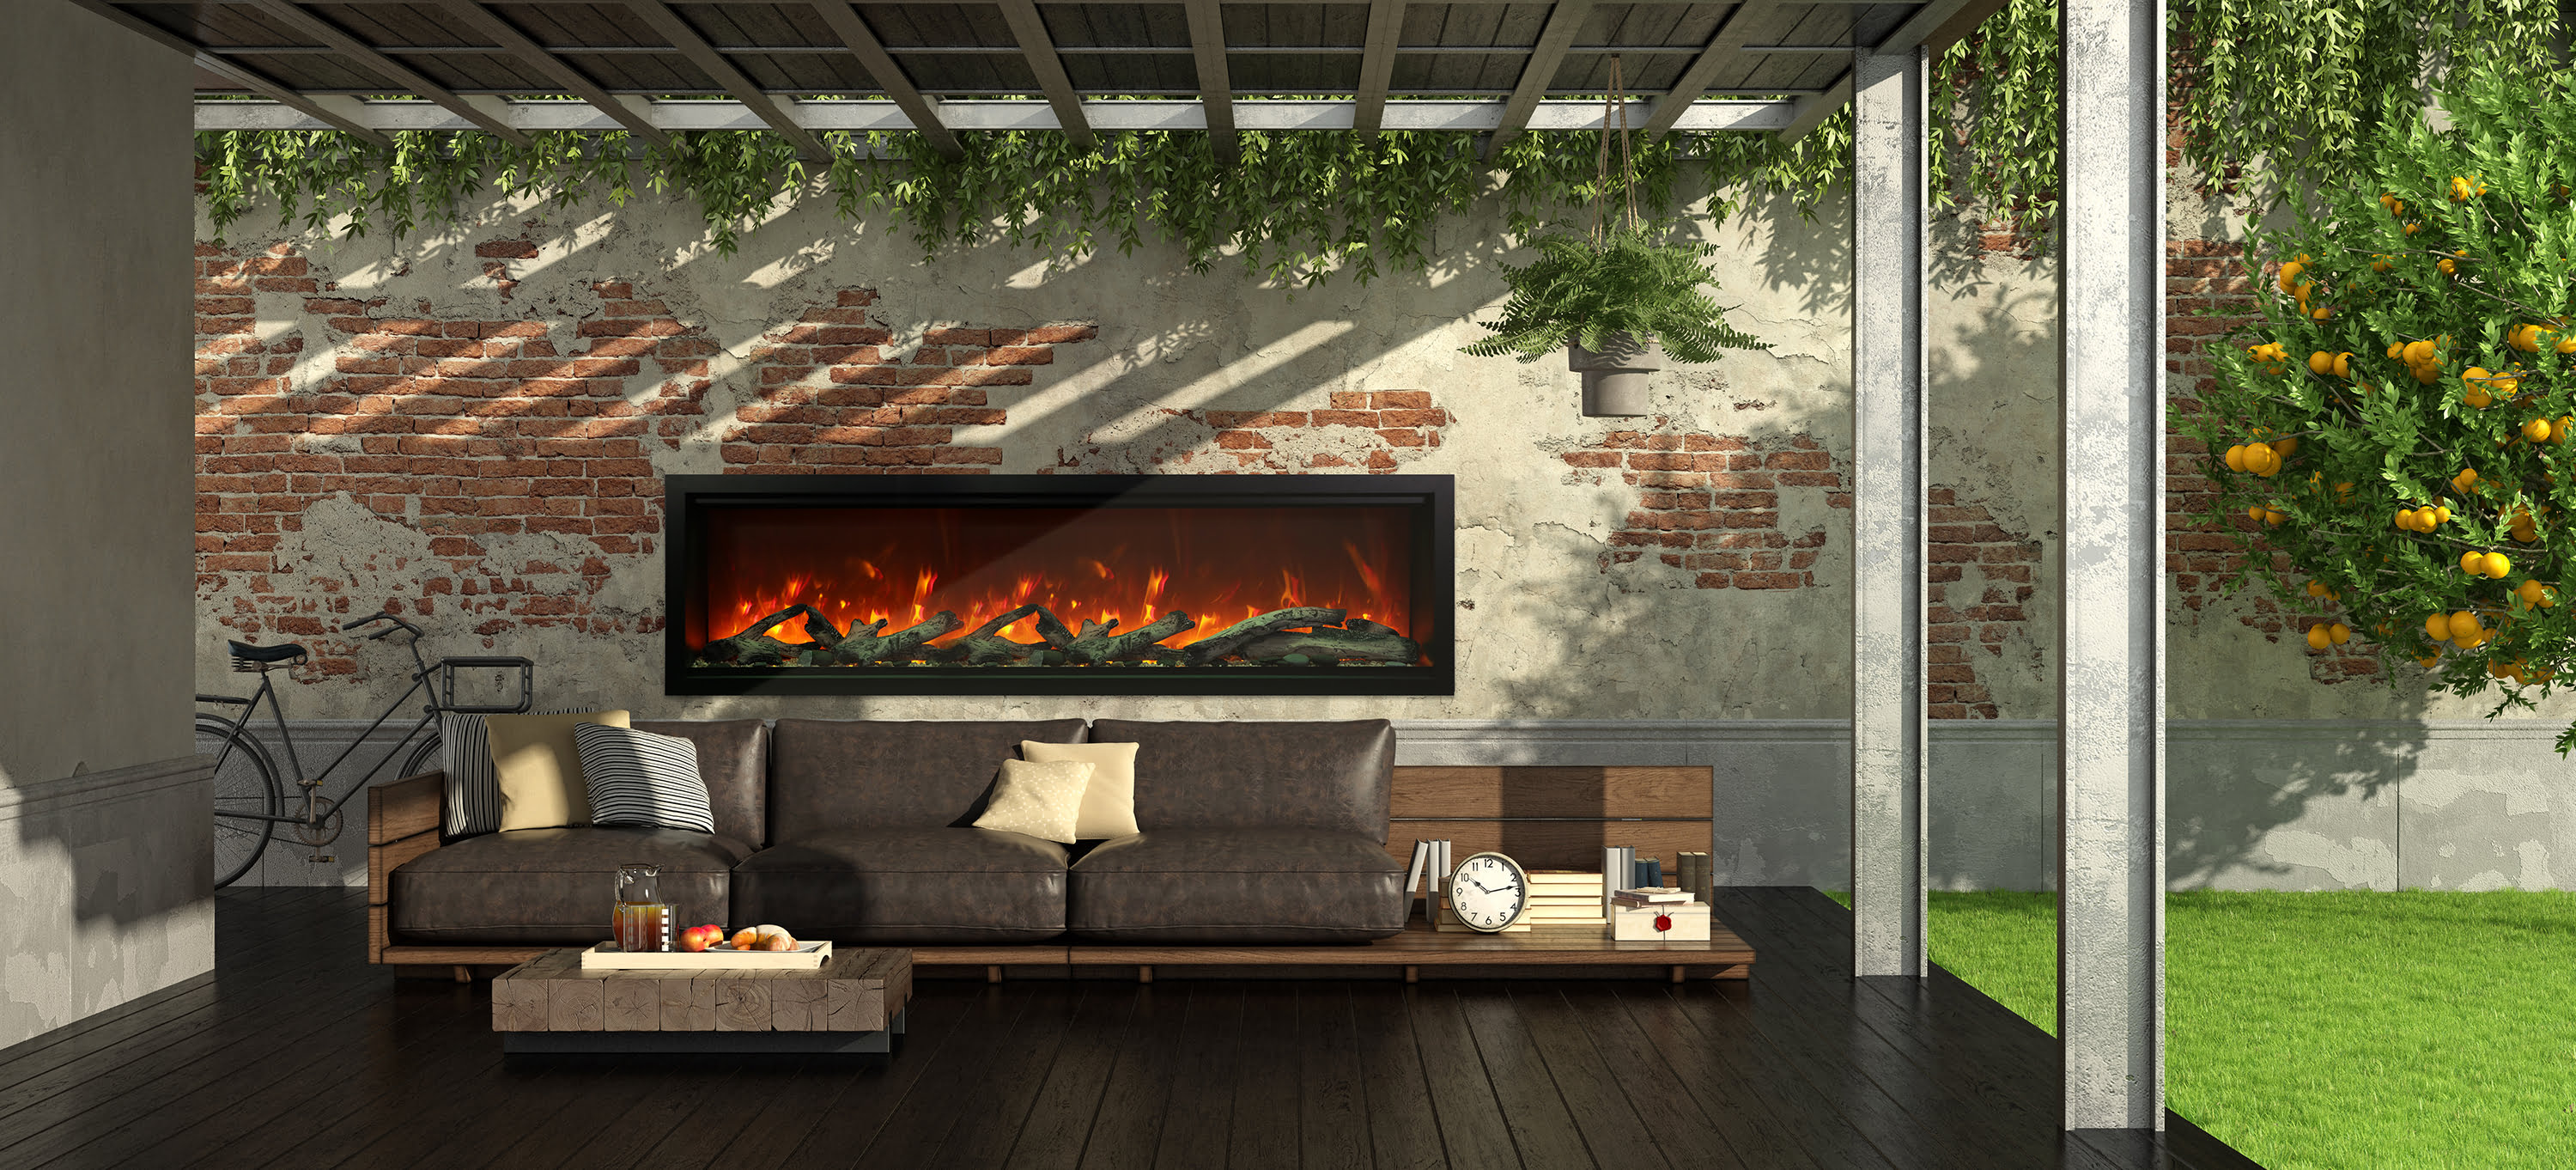 SYM XT electric fireplaces for outdoor home retreats